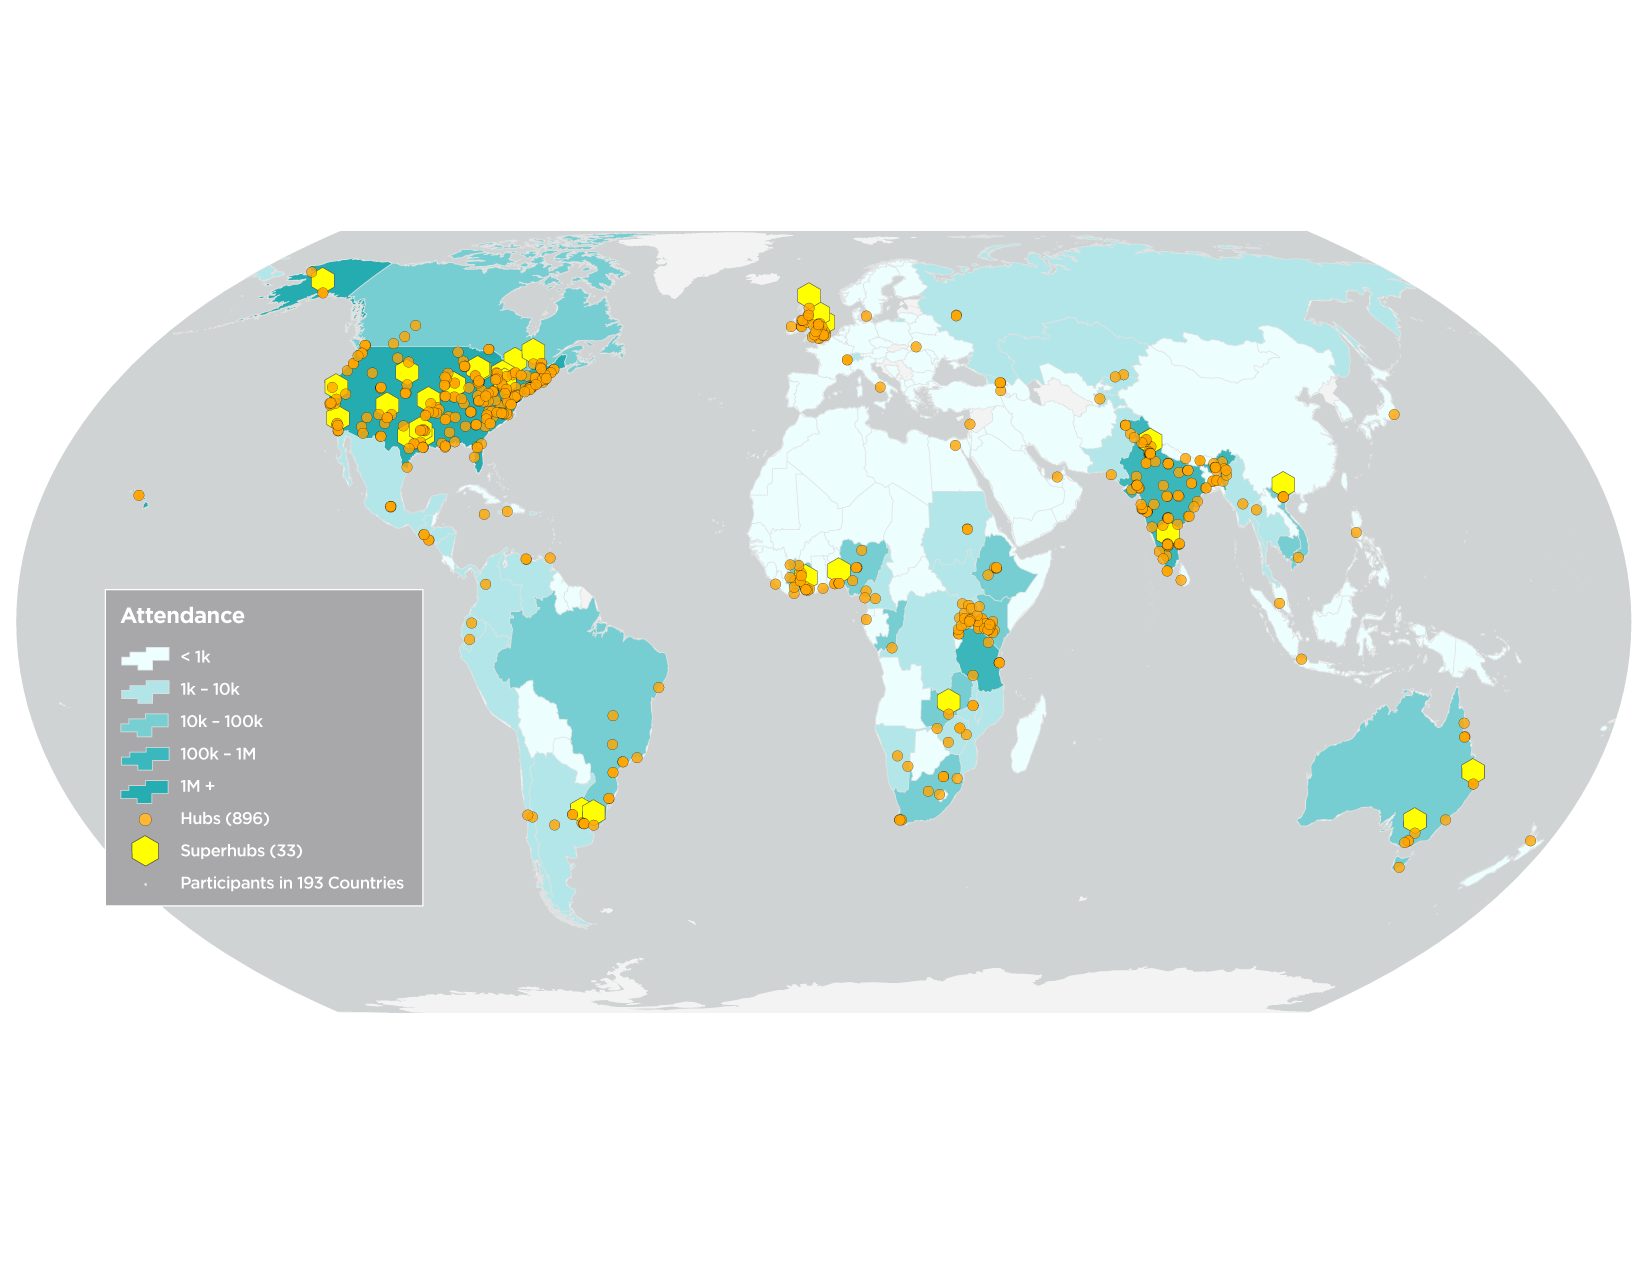 global map showing ECHO attendances and global hub and superhub locations